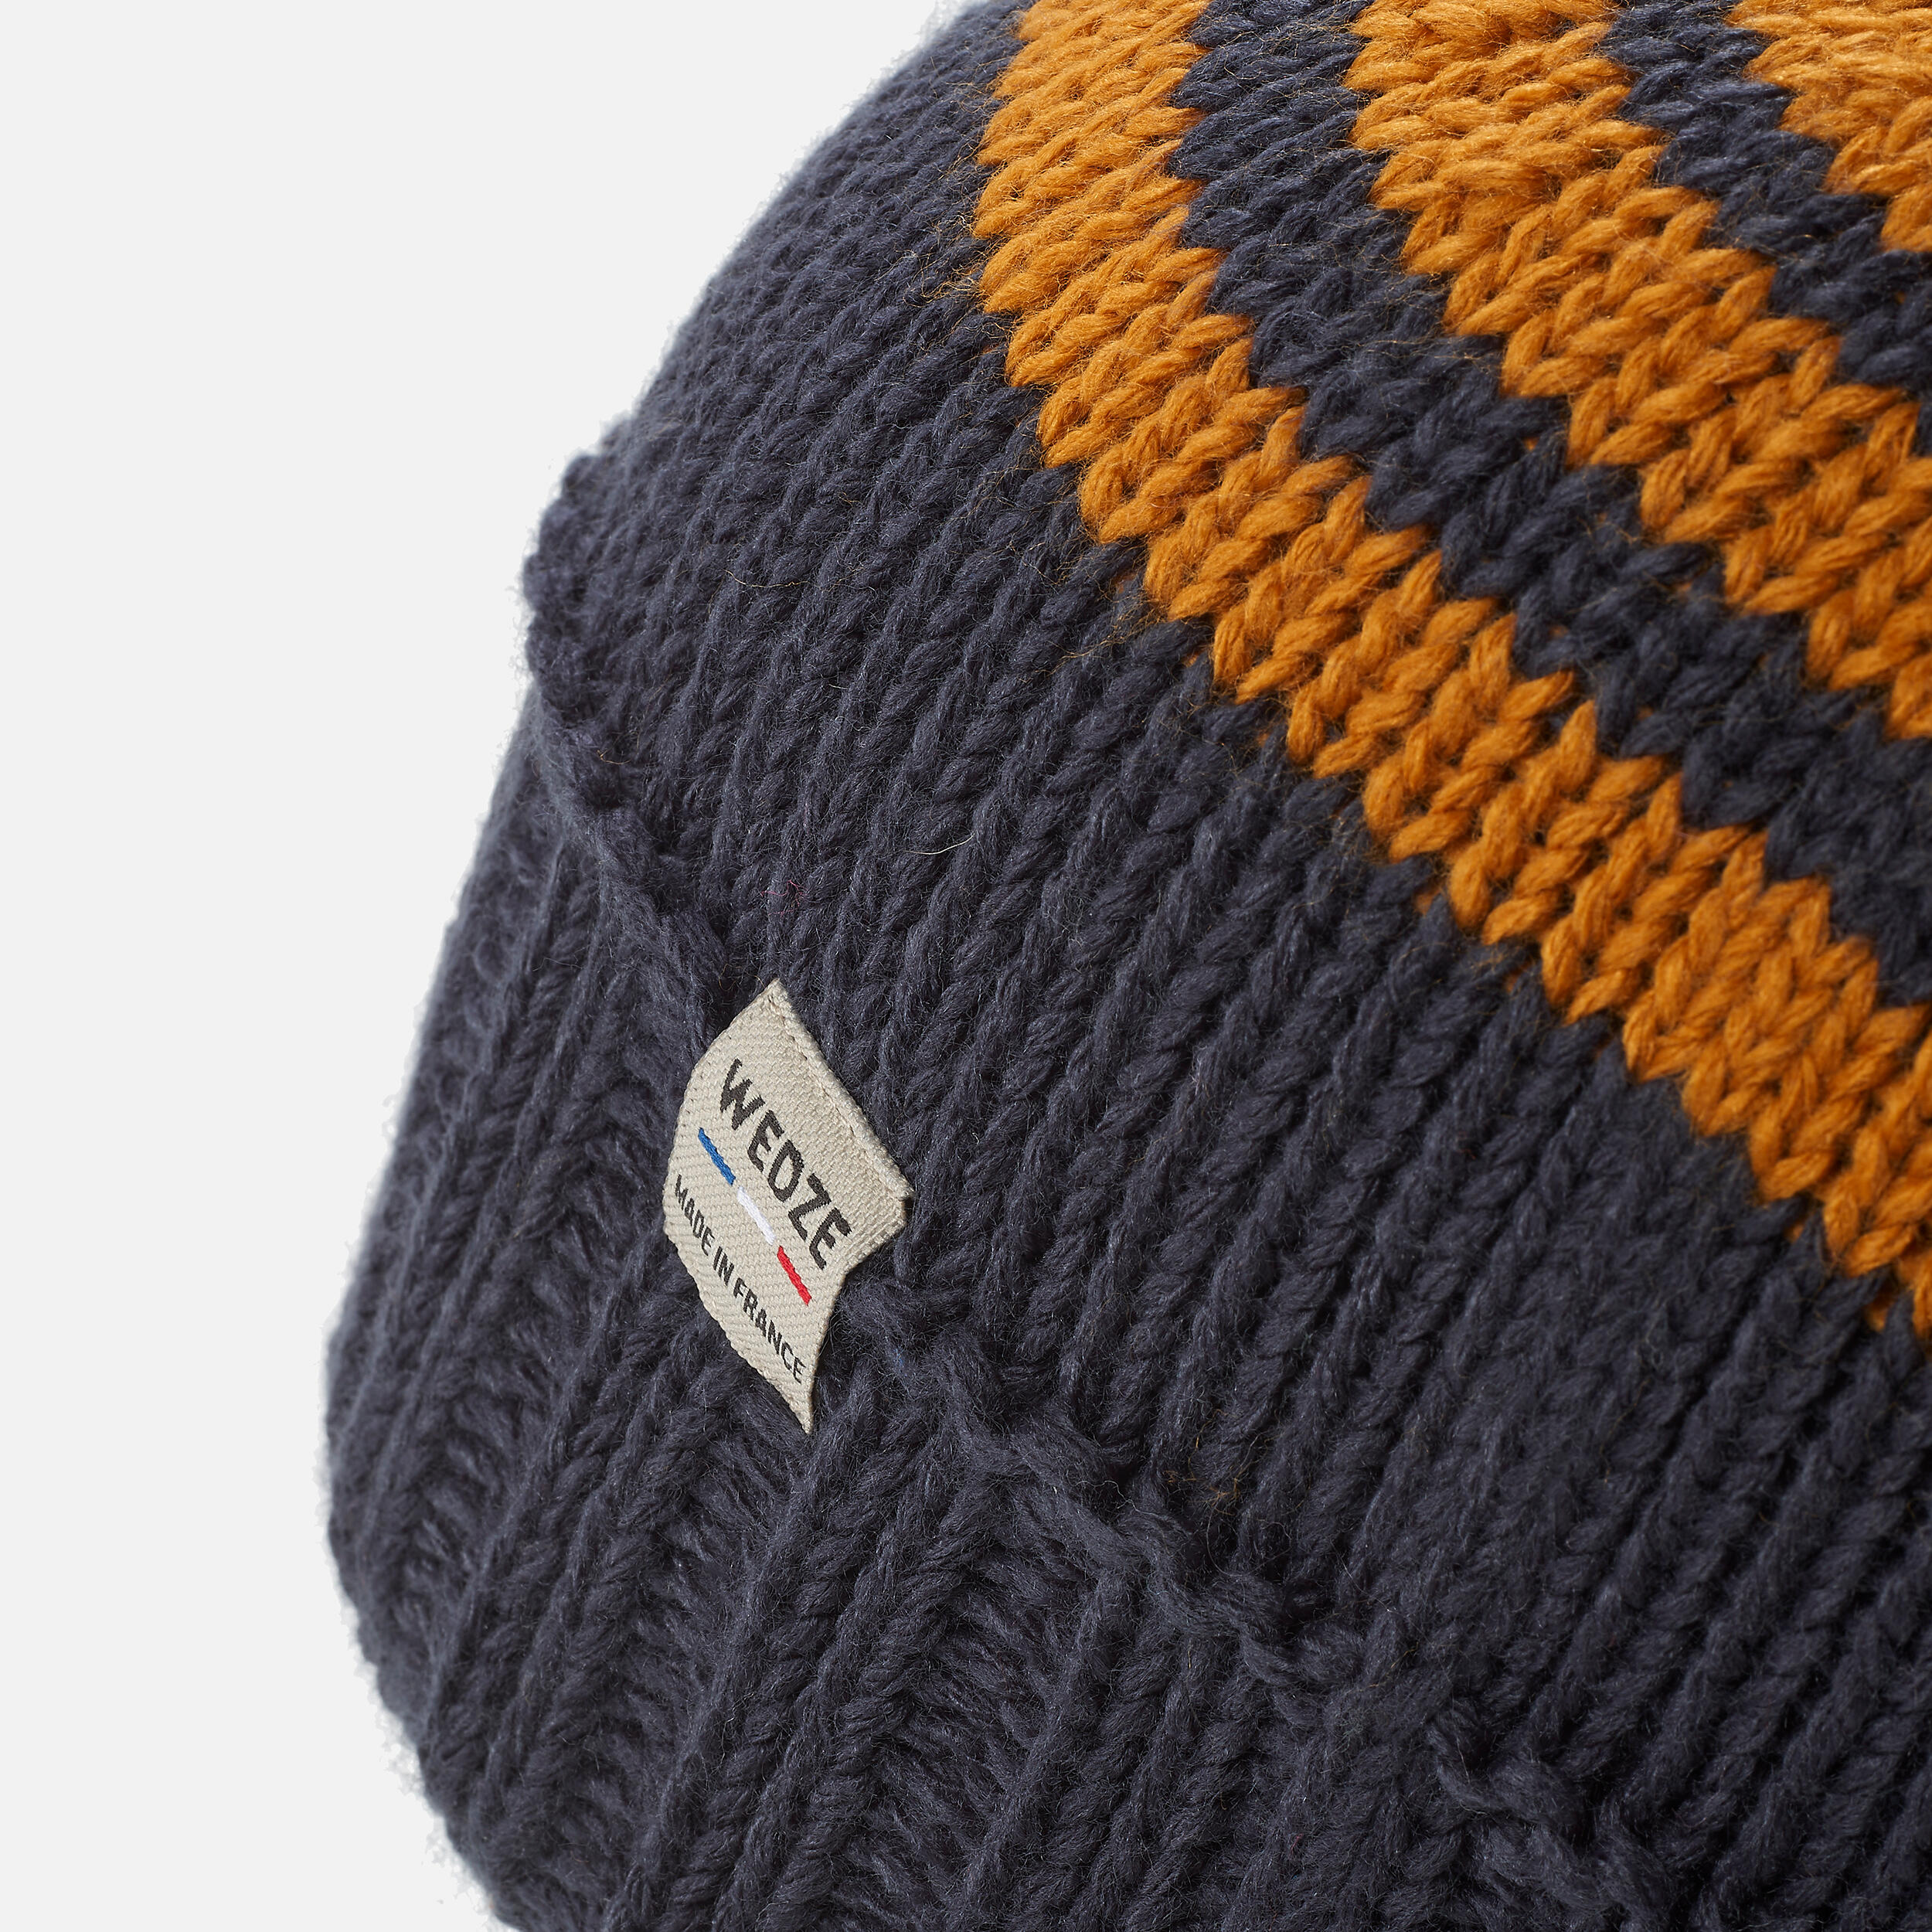 ADULT SKI HAT GRAND NORD MADE IN FRANCE - NAVY BLUE-OCHRE 5/8